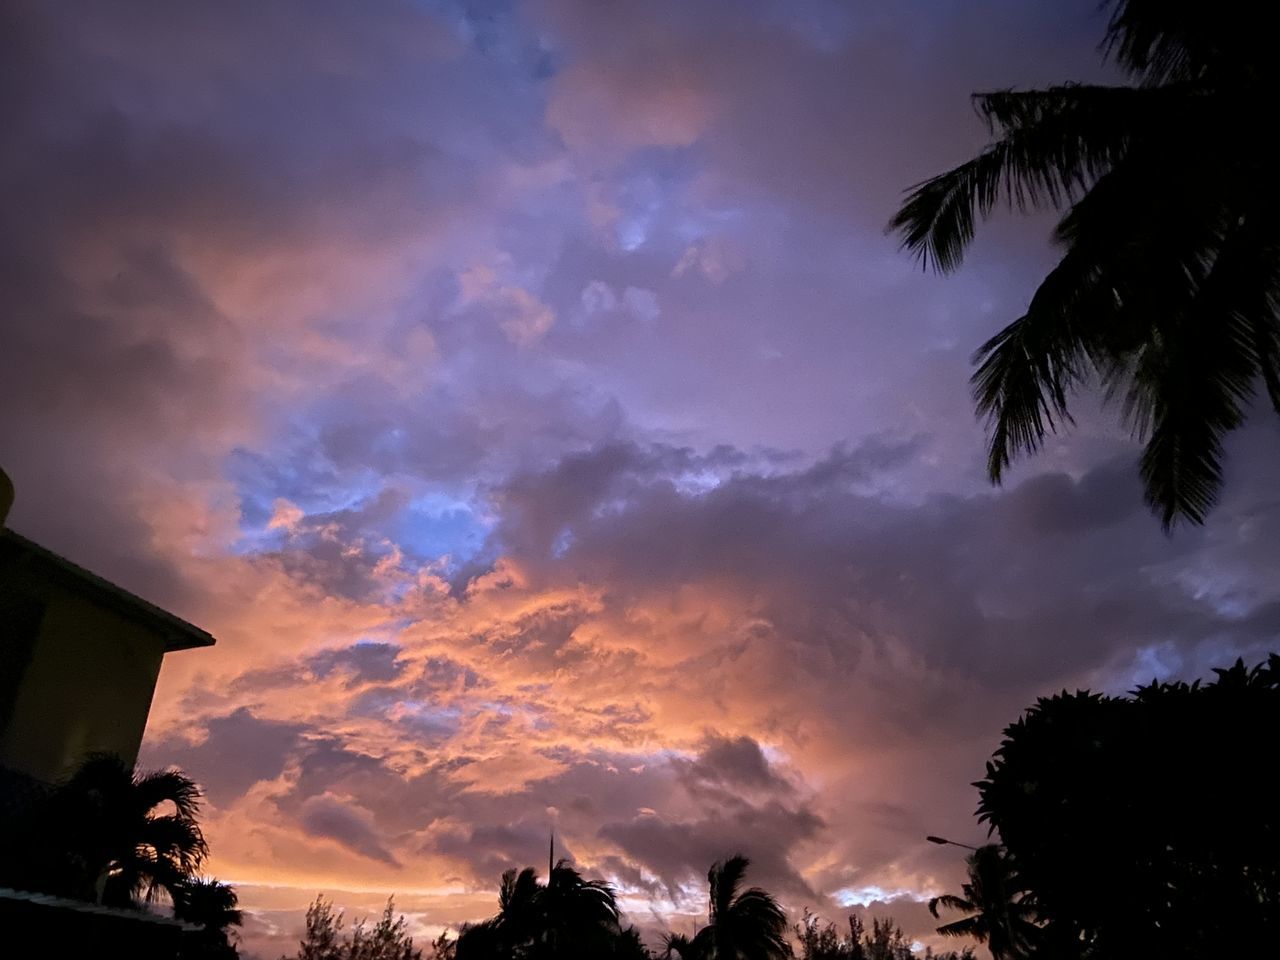 sky, cloud, tree, sunset, dusk, evening, nature, silhouette, beauty in nature, plant, architecture, tropical climate, palm tree, building exterior, sunlight, dramatic sky, no people, scenics - nature, built structure, building, outdoors, darkness, house, low angle view, tranquility, cloudscape, afterglow, environment